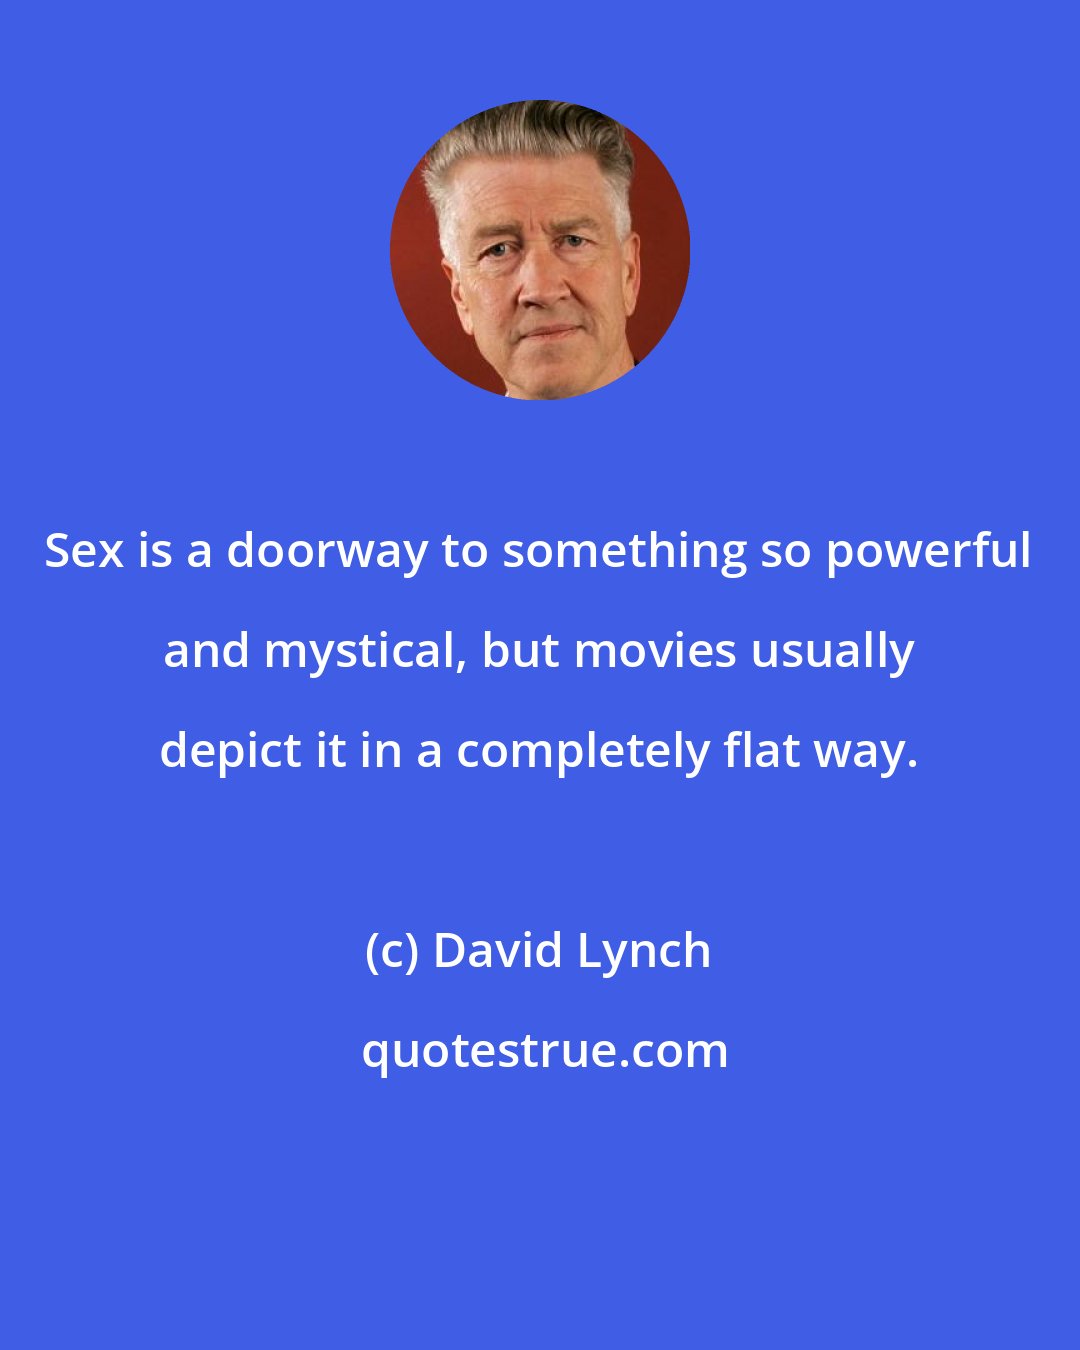 David Lynch: Sex is a doorway to something so powerful and mystical, but movies usually depict it in a completely flat way.